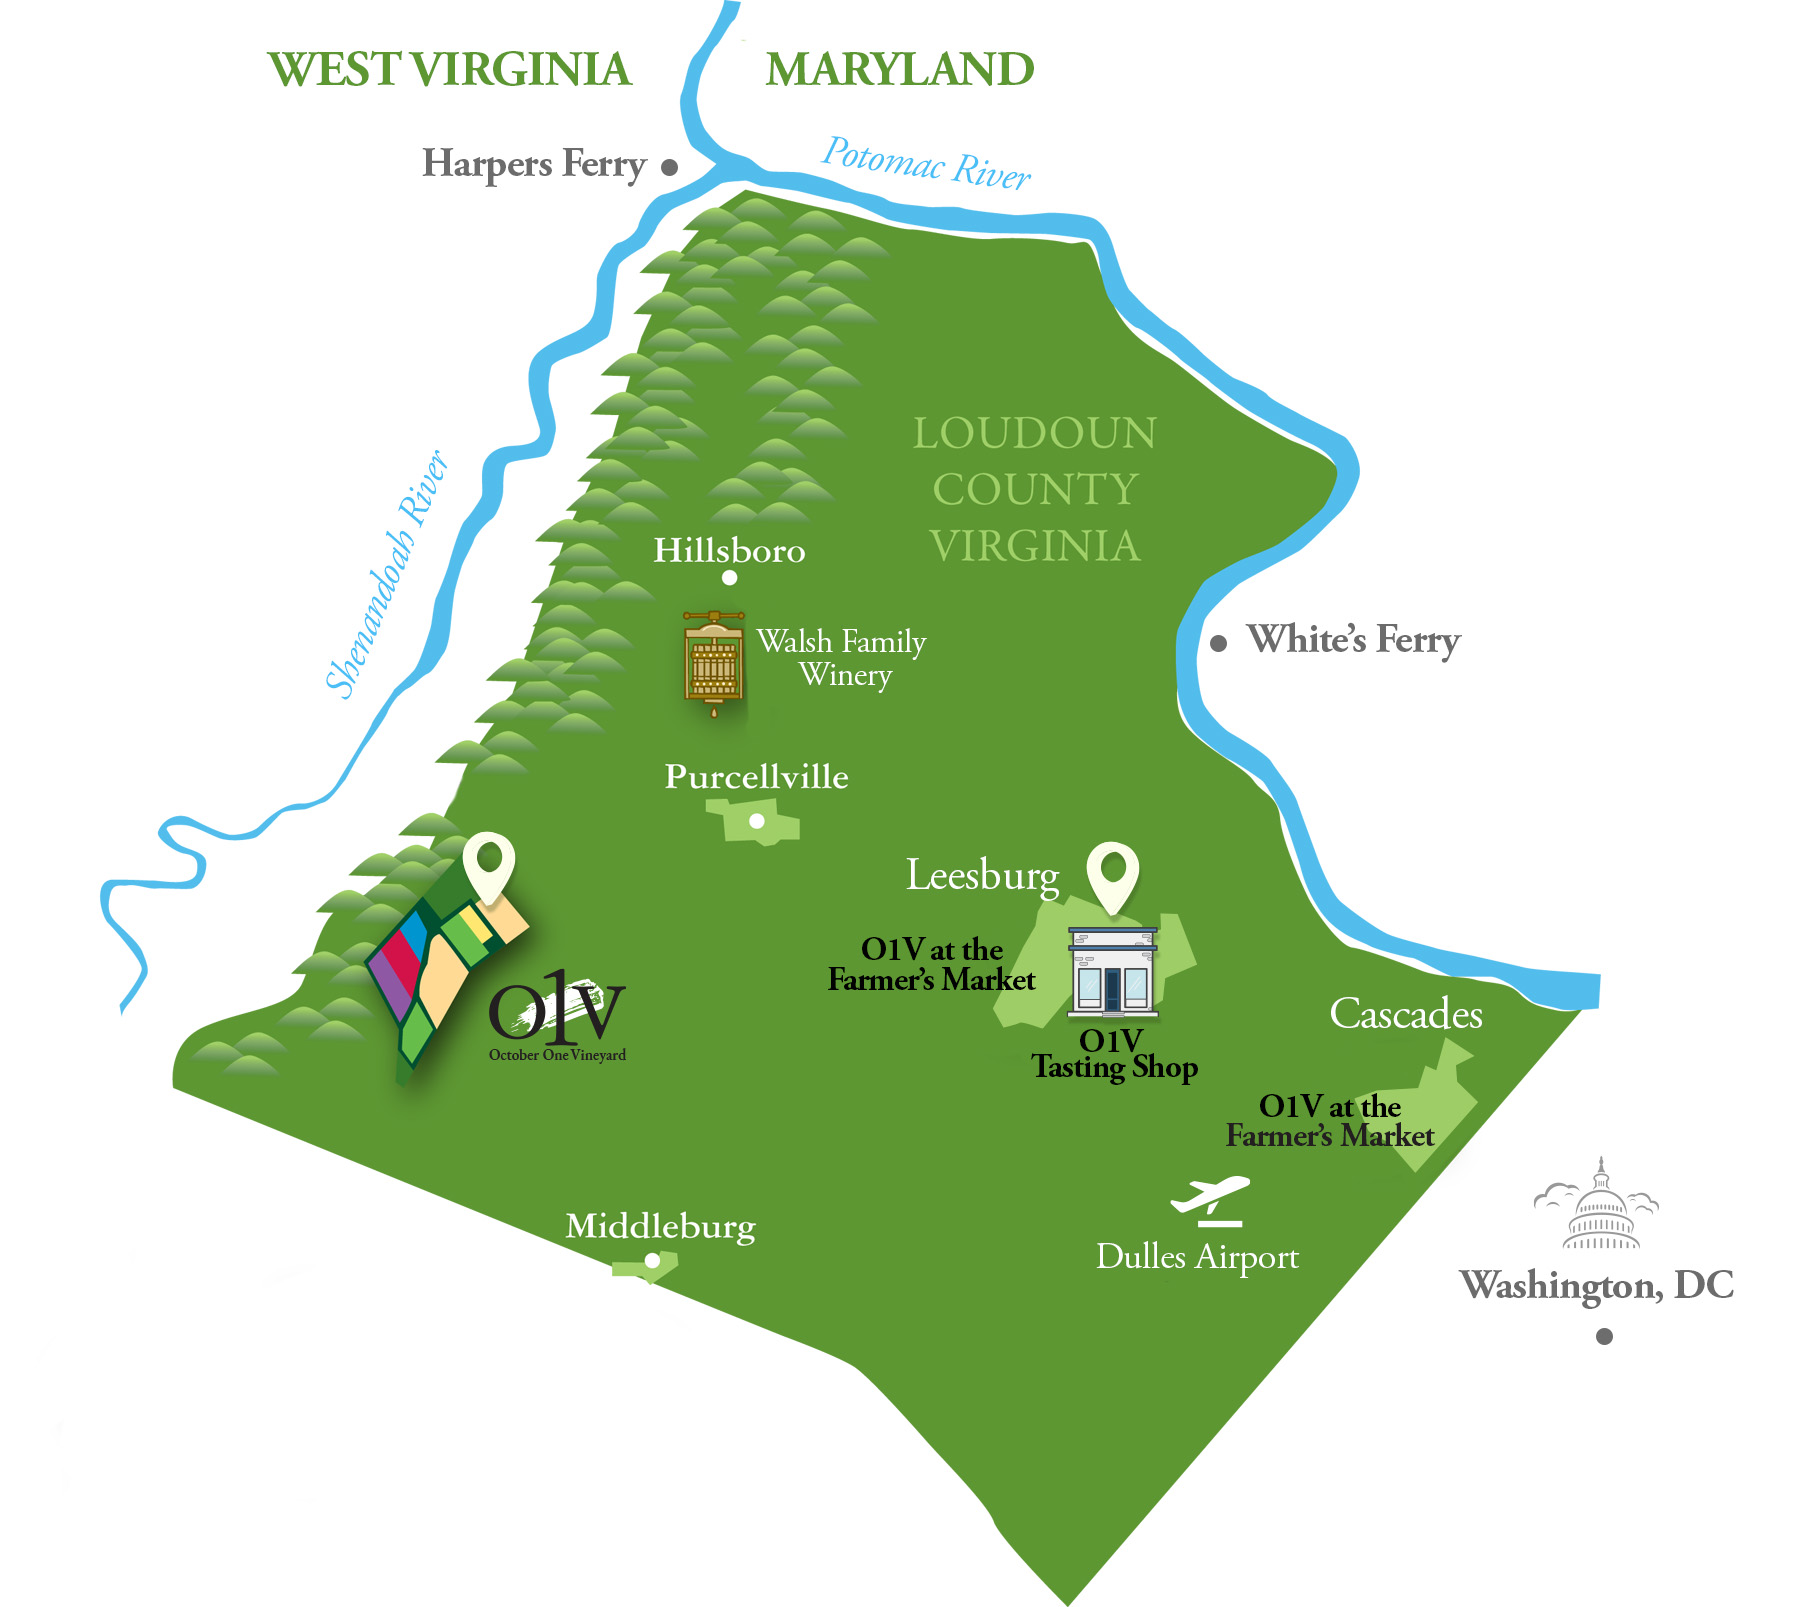 Illustrated Loudoun County Map with winery and tasting shop